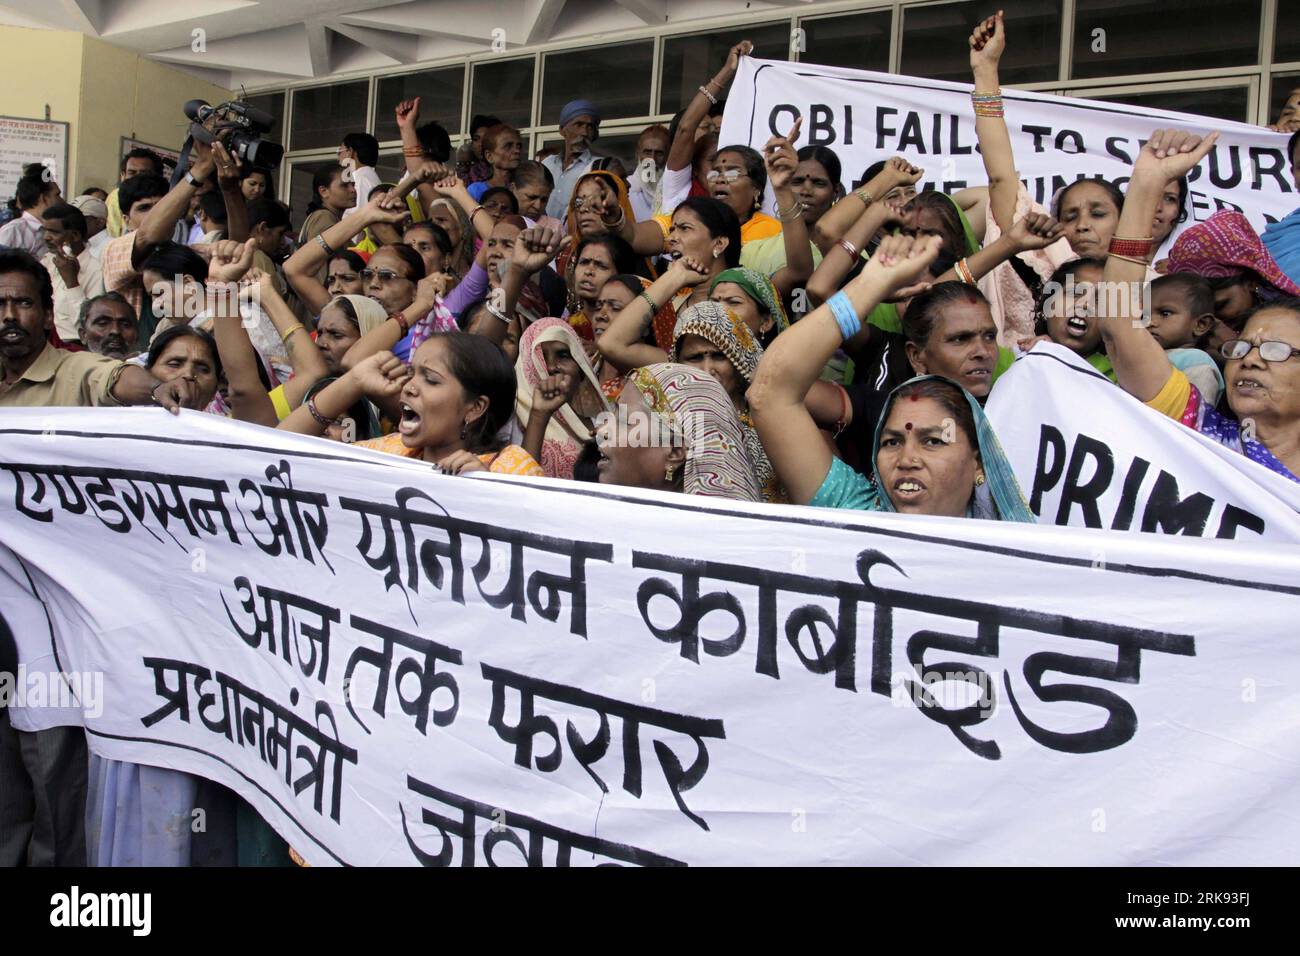 Bildnummer: 54114159  Datum: 07.06.2010  Copyright: imago/Xinhua  Local citizens protest outside the Bhopal court in Bhopal, capital of Indian state of Madhya Pradesh, on June 7, 2010. An Indian court Monday sentenced eight to two years in jail in the 1984 Bhopal gas disaster in which over 20,000 were killed by toxic chemicals leaked from a Union Carbide pesticide plant in Bhopal. (Xinhua/Stringer) (3)INDIA-BHOPAL DISASTER-VERDICT PUBLICATIONxNOTxINxCHN Gesellschaft Demo Folgen Katastrophe von Bhopal Chemiekatatstrophe Umweltkatatstrophe Folgen kbdig xdp premiumd xint 2010 quer o00 Gericht, Ge Stock Photo